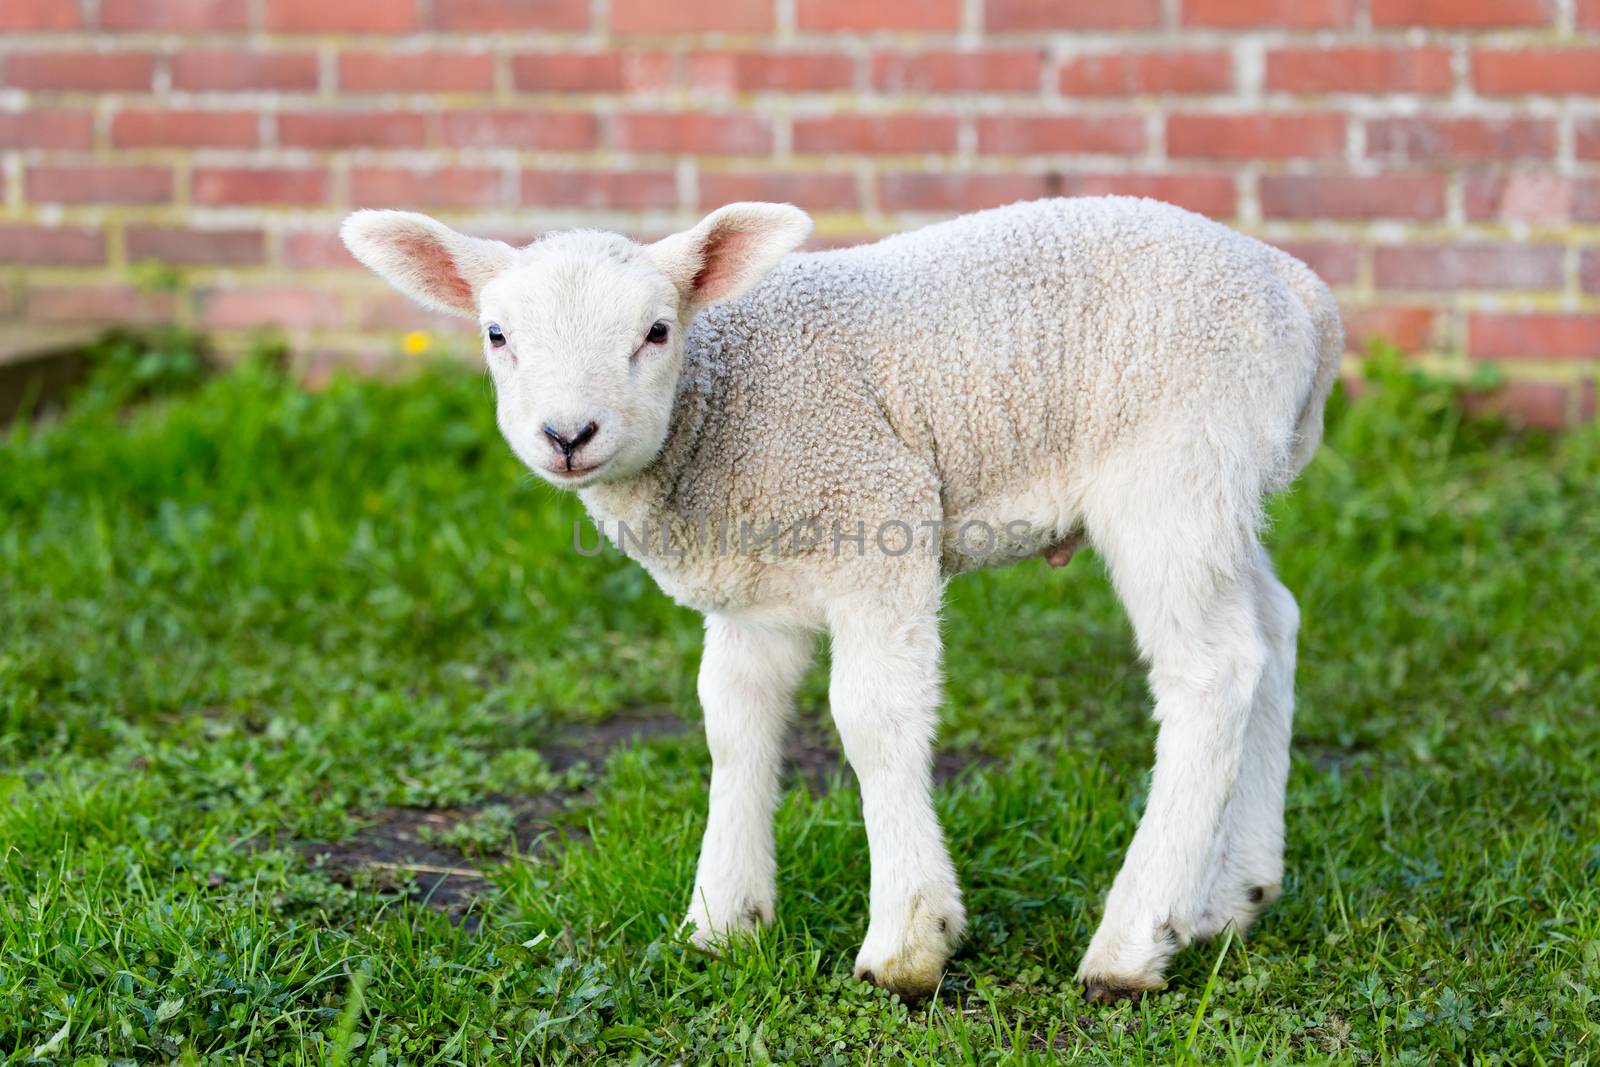 One white newborn lamb standing in green grass with wall by BenSchonewille